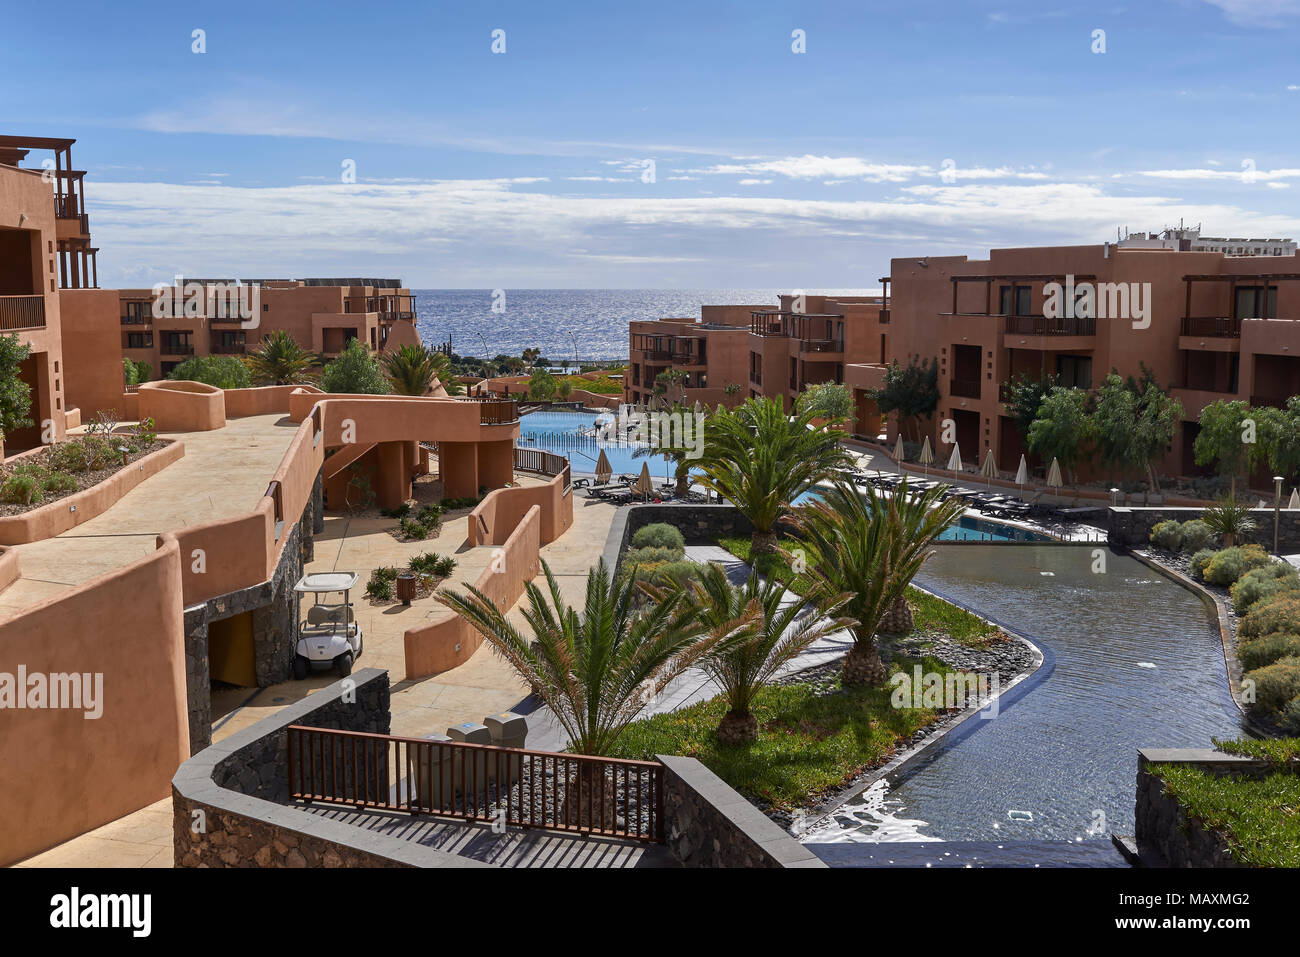 Looking through the Sandos San Blas Hotel Complex in Tenerife, on to the Sea in the Background on this Island Stock Photo - Alamy